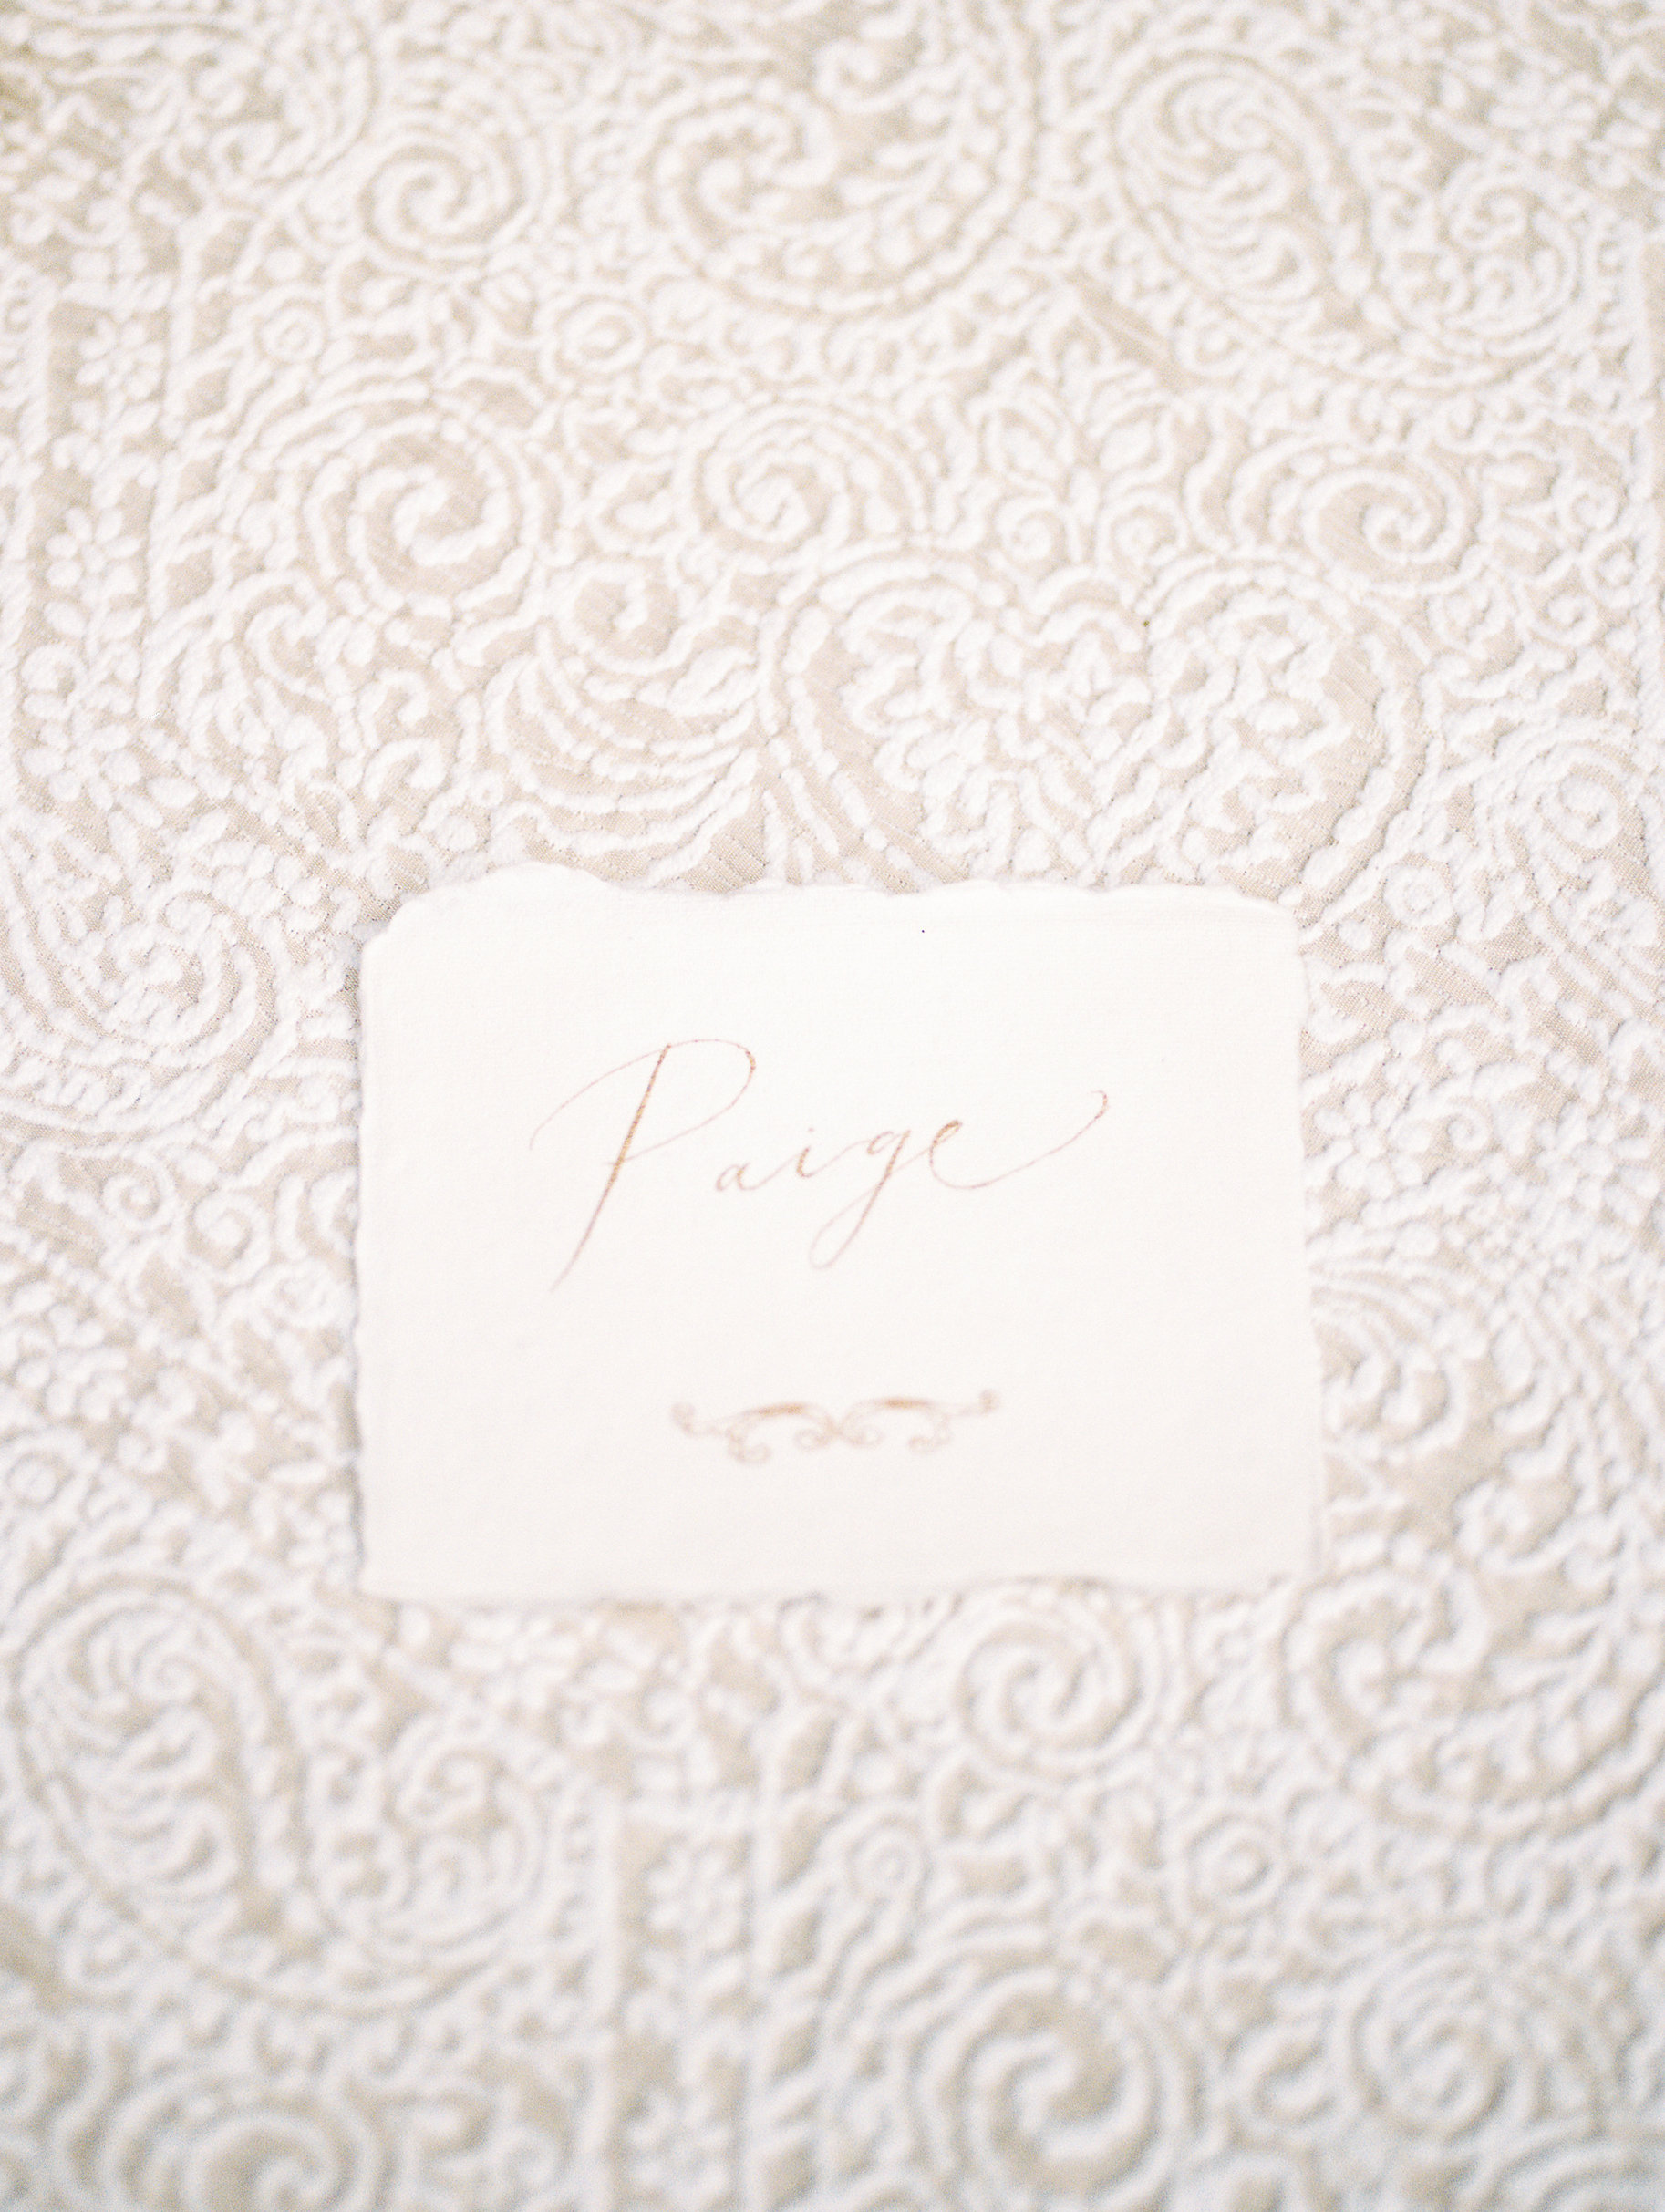 Paper Goods & Calligraphy: Spurlé Gul Studio | Photography: Lissa Ryan Photography | Planning & Creative Direction: Claire Duran Wedding & Events | Venue: Dover Hall Estate